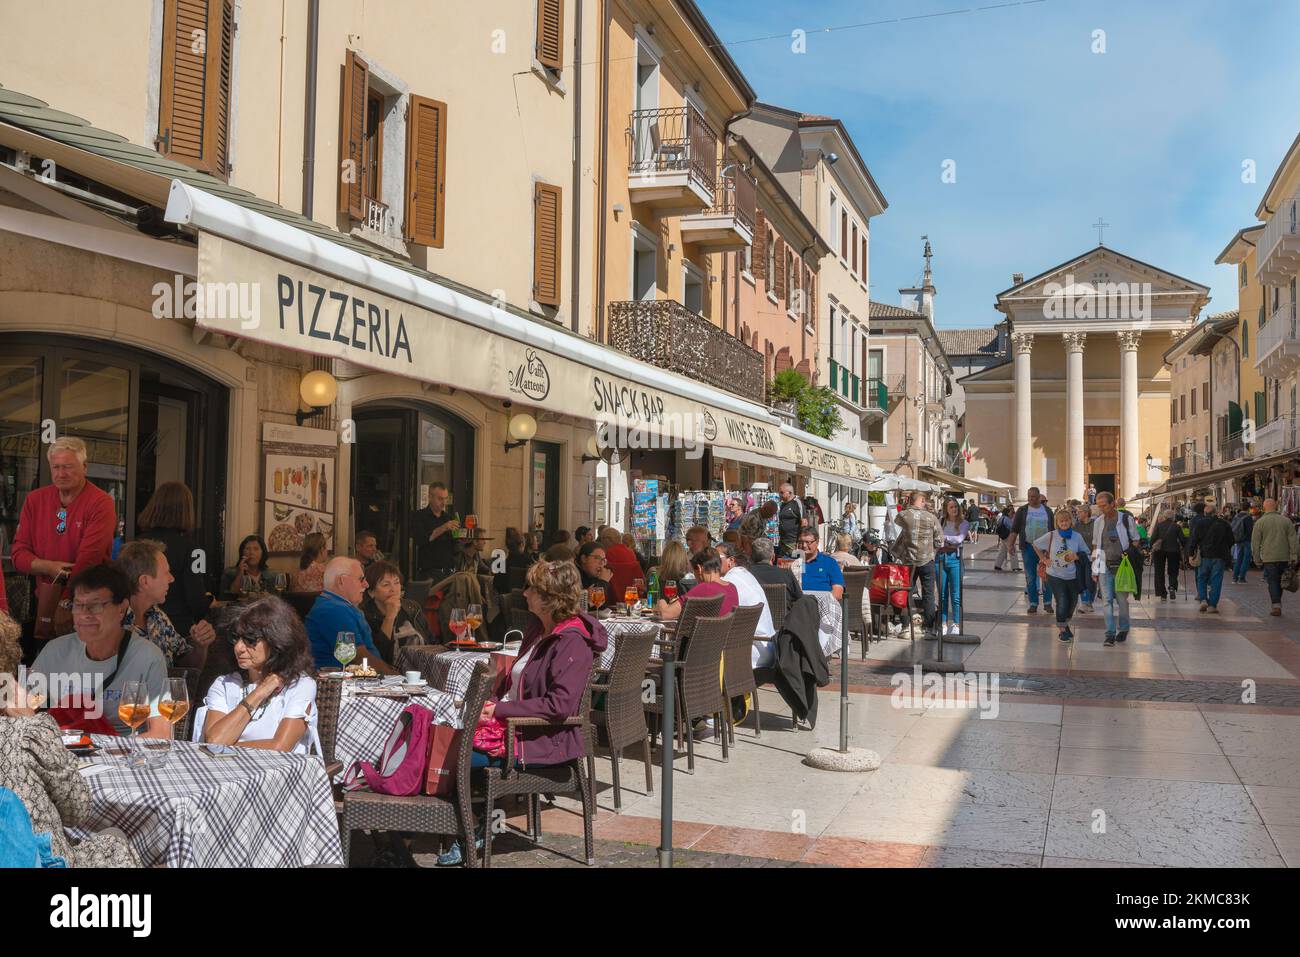 Bardolino town Lake Garda, view in summer of people relaxing at cafe tables in Via San Martino in the historic old town center of Bardolino, Italy Stock Photo